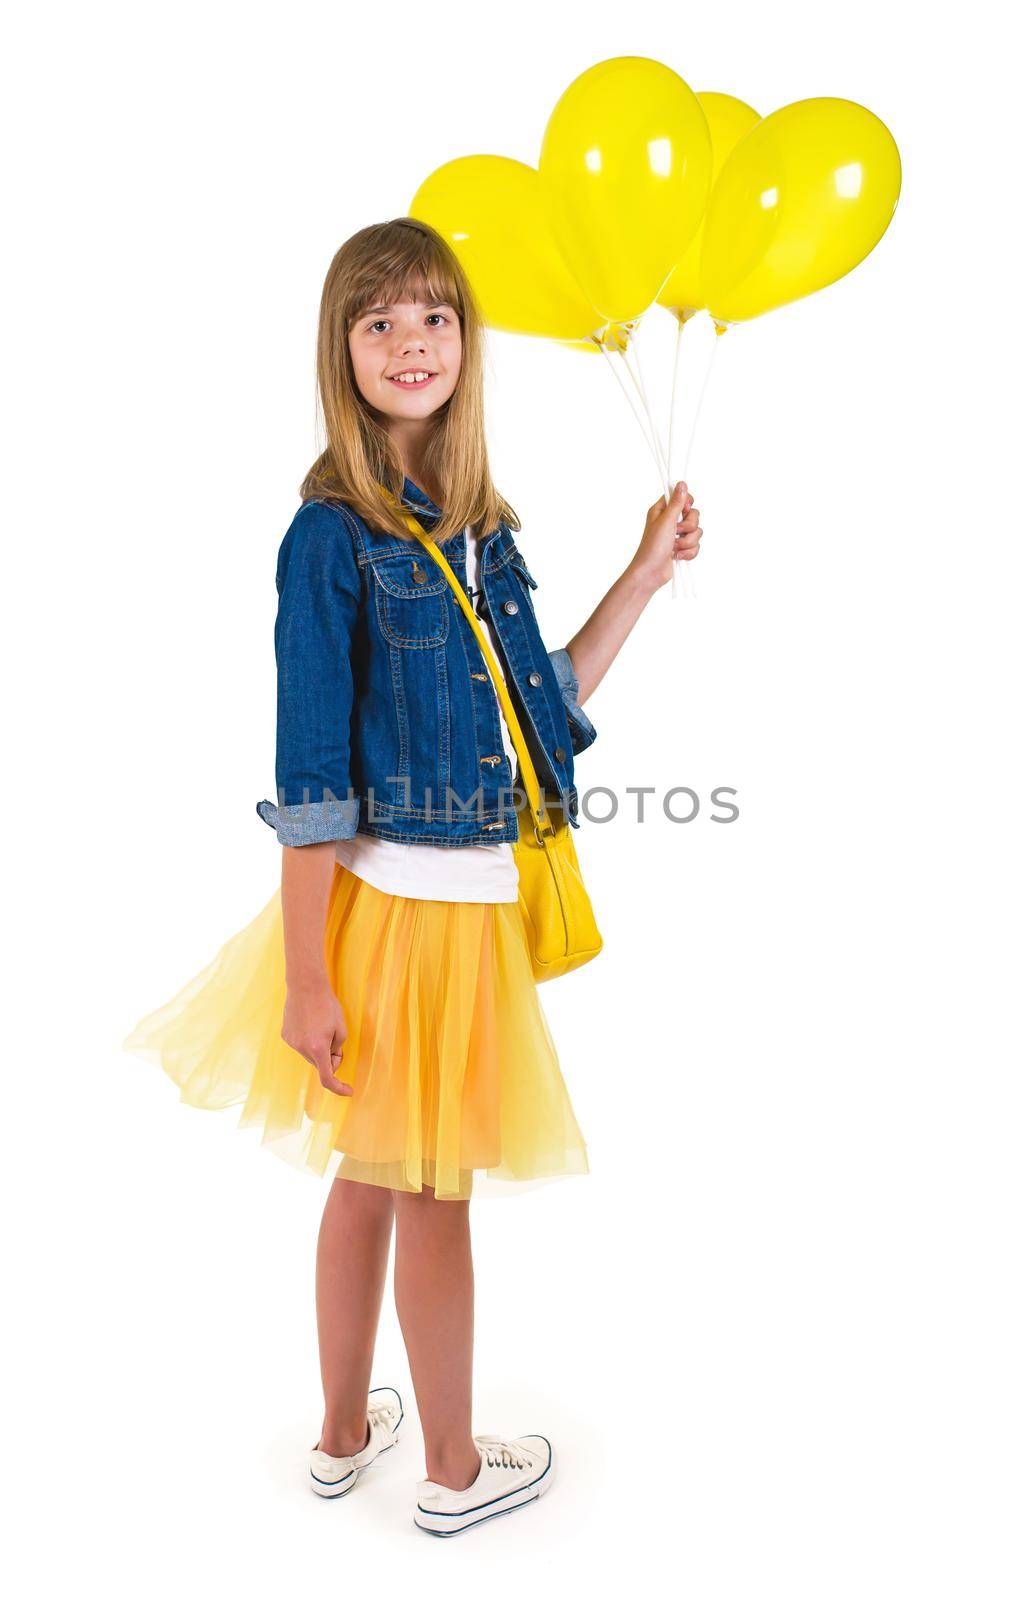 joy on the girl face holding yellow balloons on a light background by aprilphoto